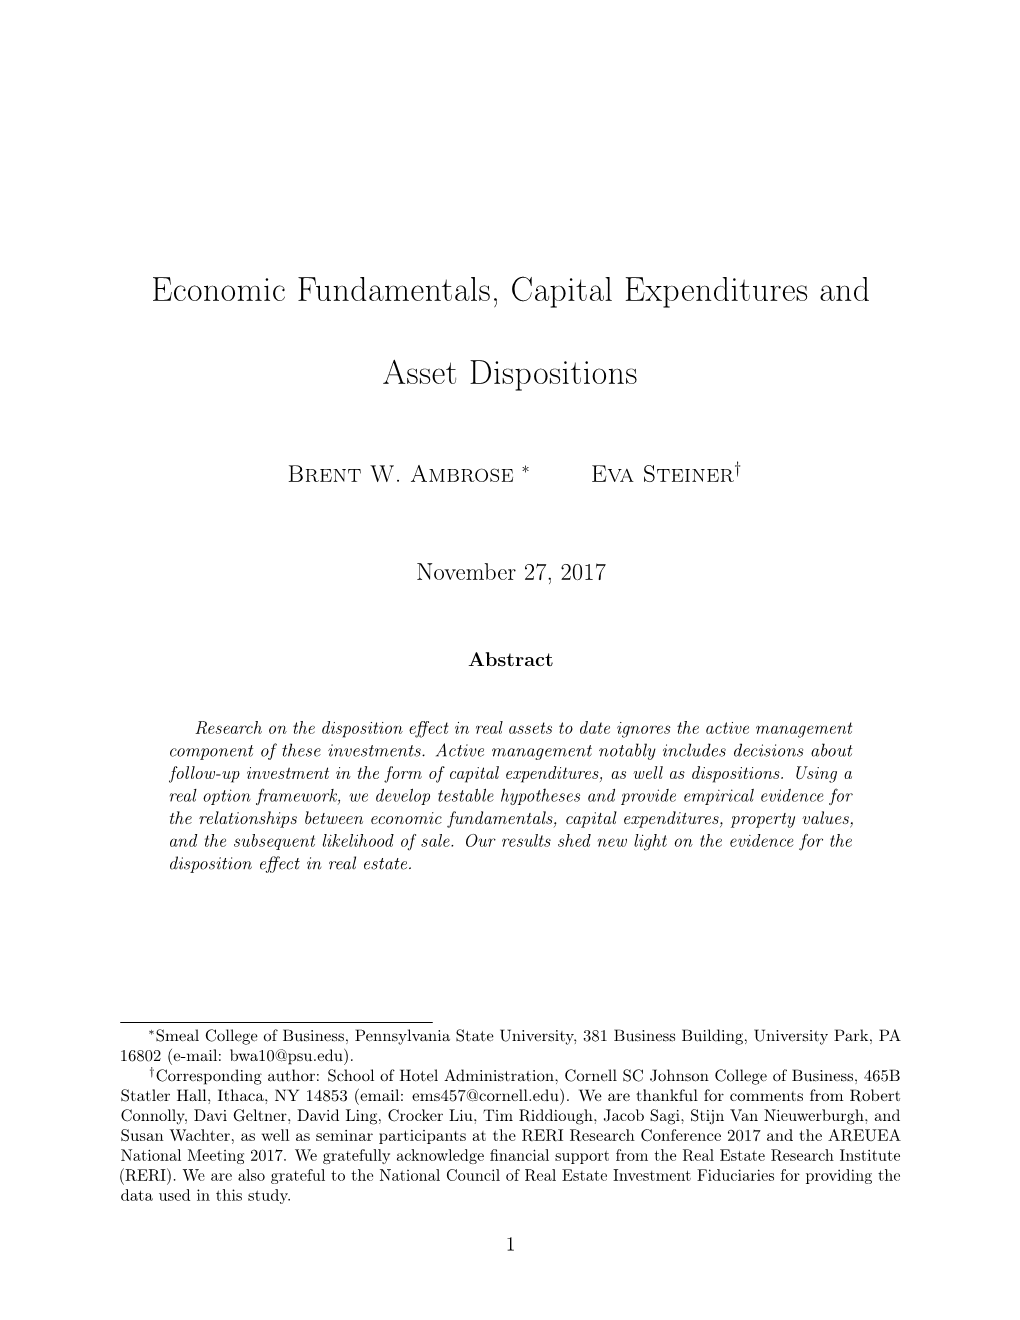 Economic Fundamentals, Capital Expenditures and Asset Dispositions